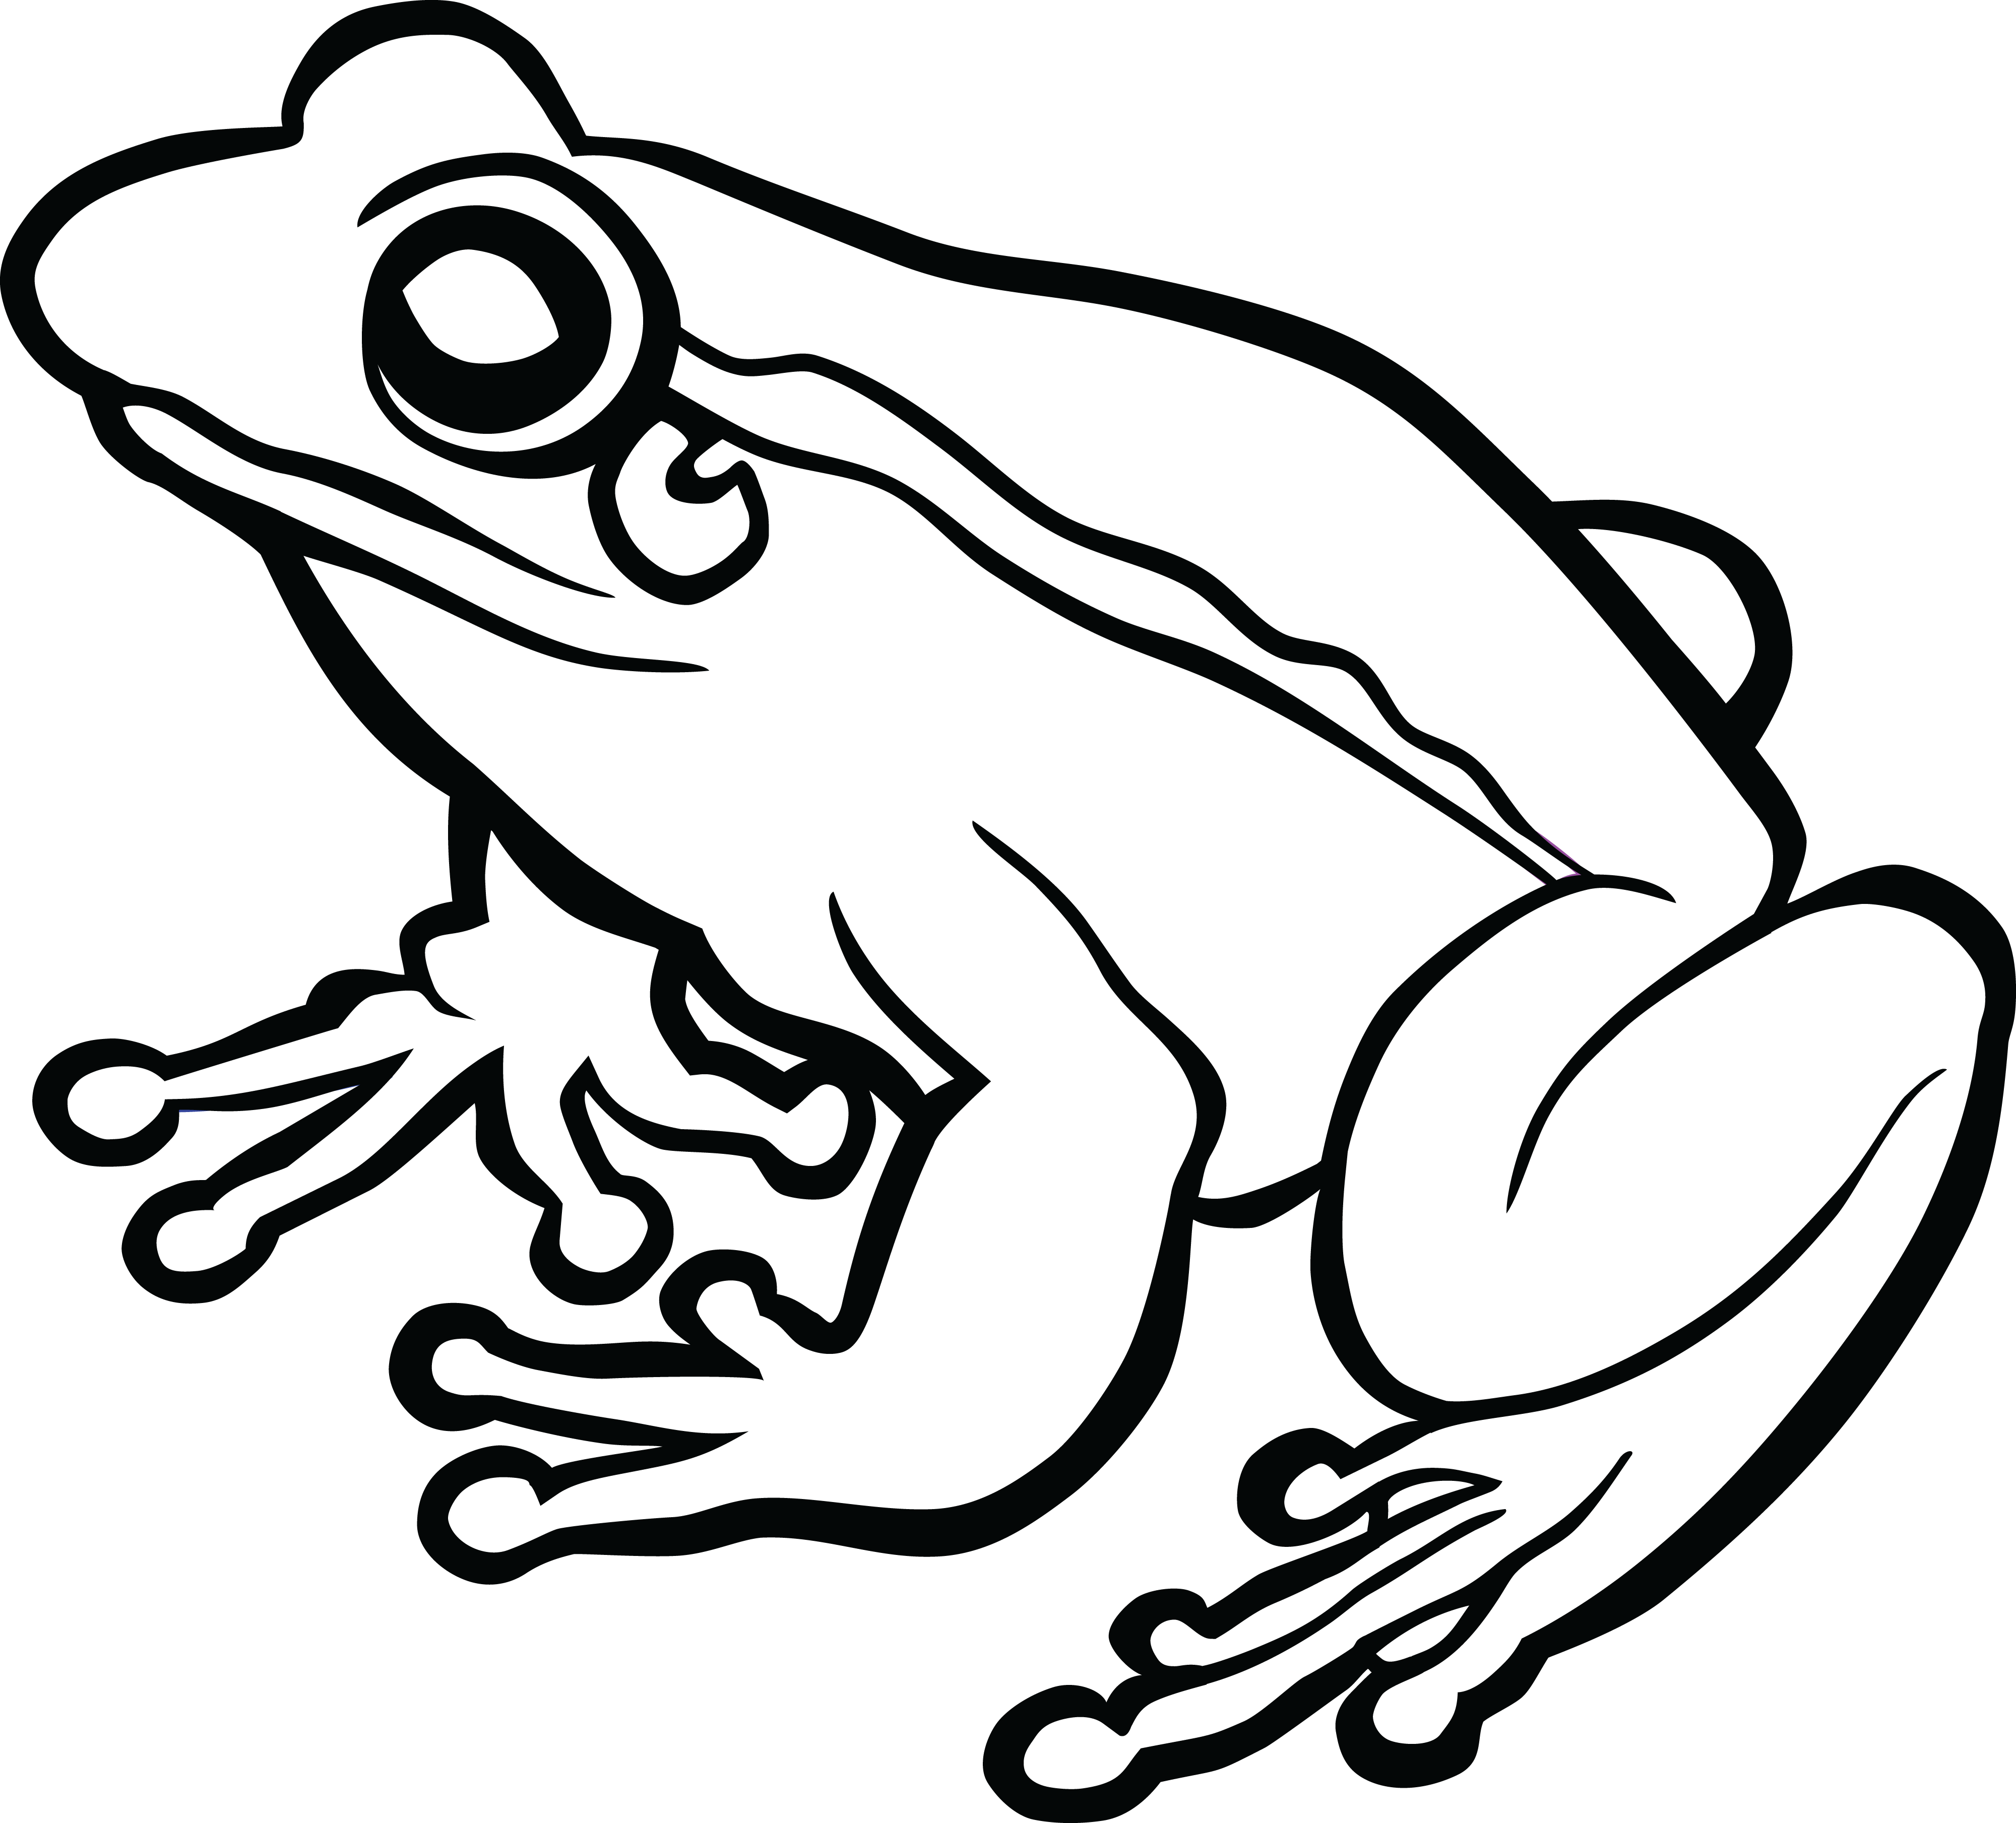 Frogs clipart black and white, Frogs black and white